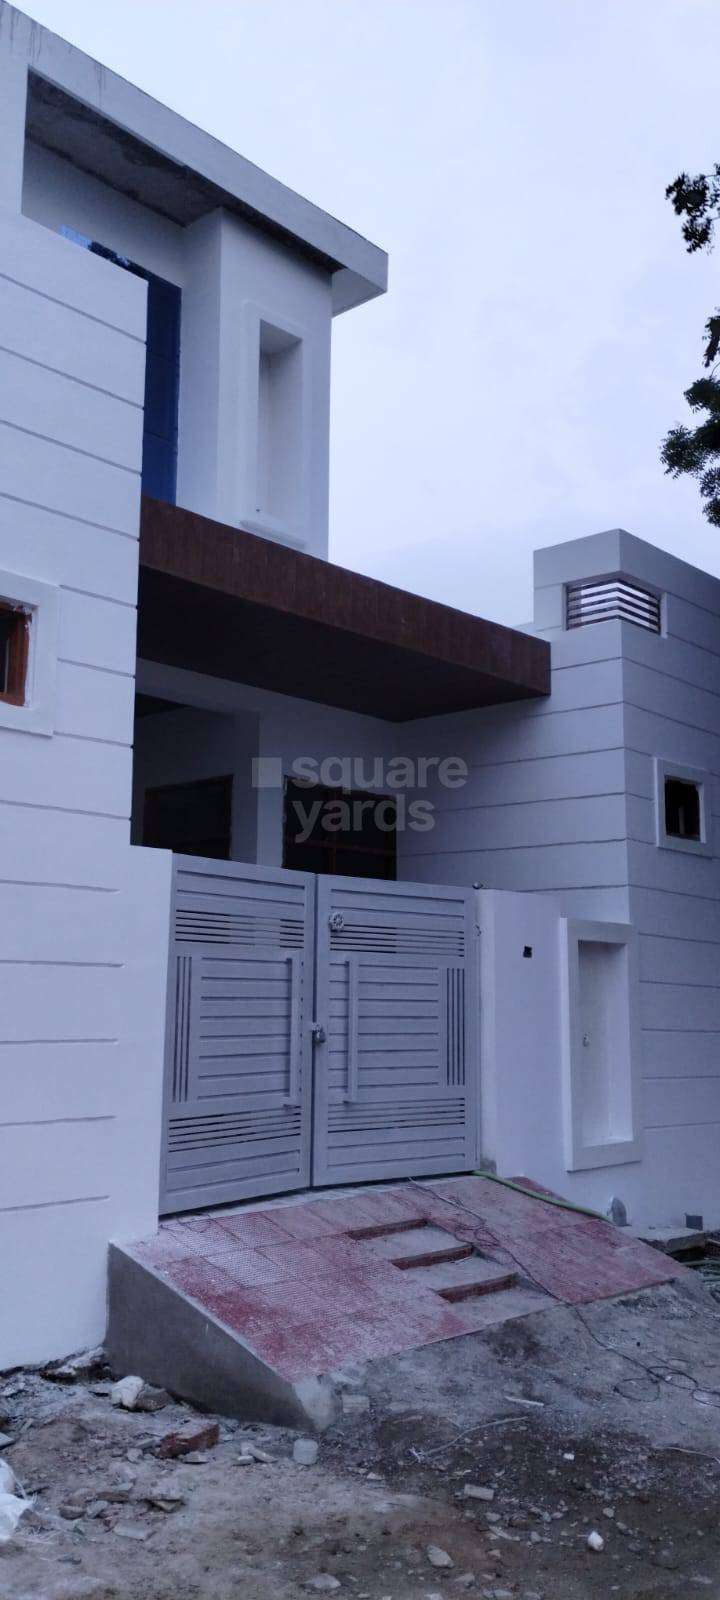 2 Bedroom 1250 Sq.Ft. Independent House in Chinhat Lucknow